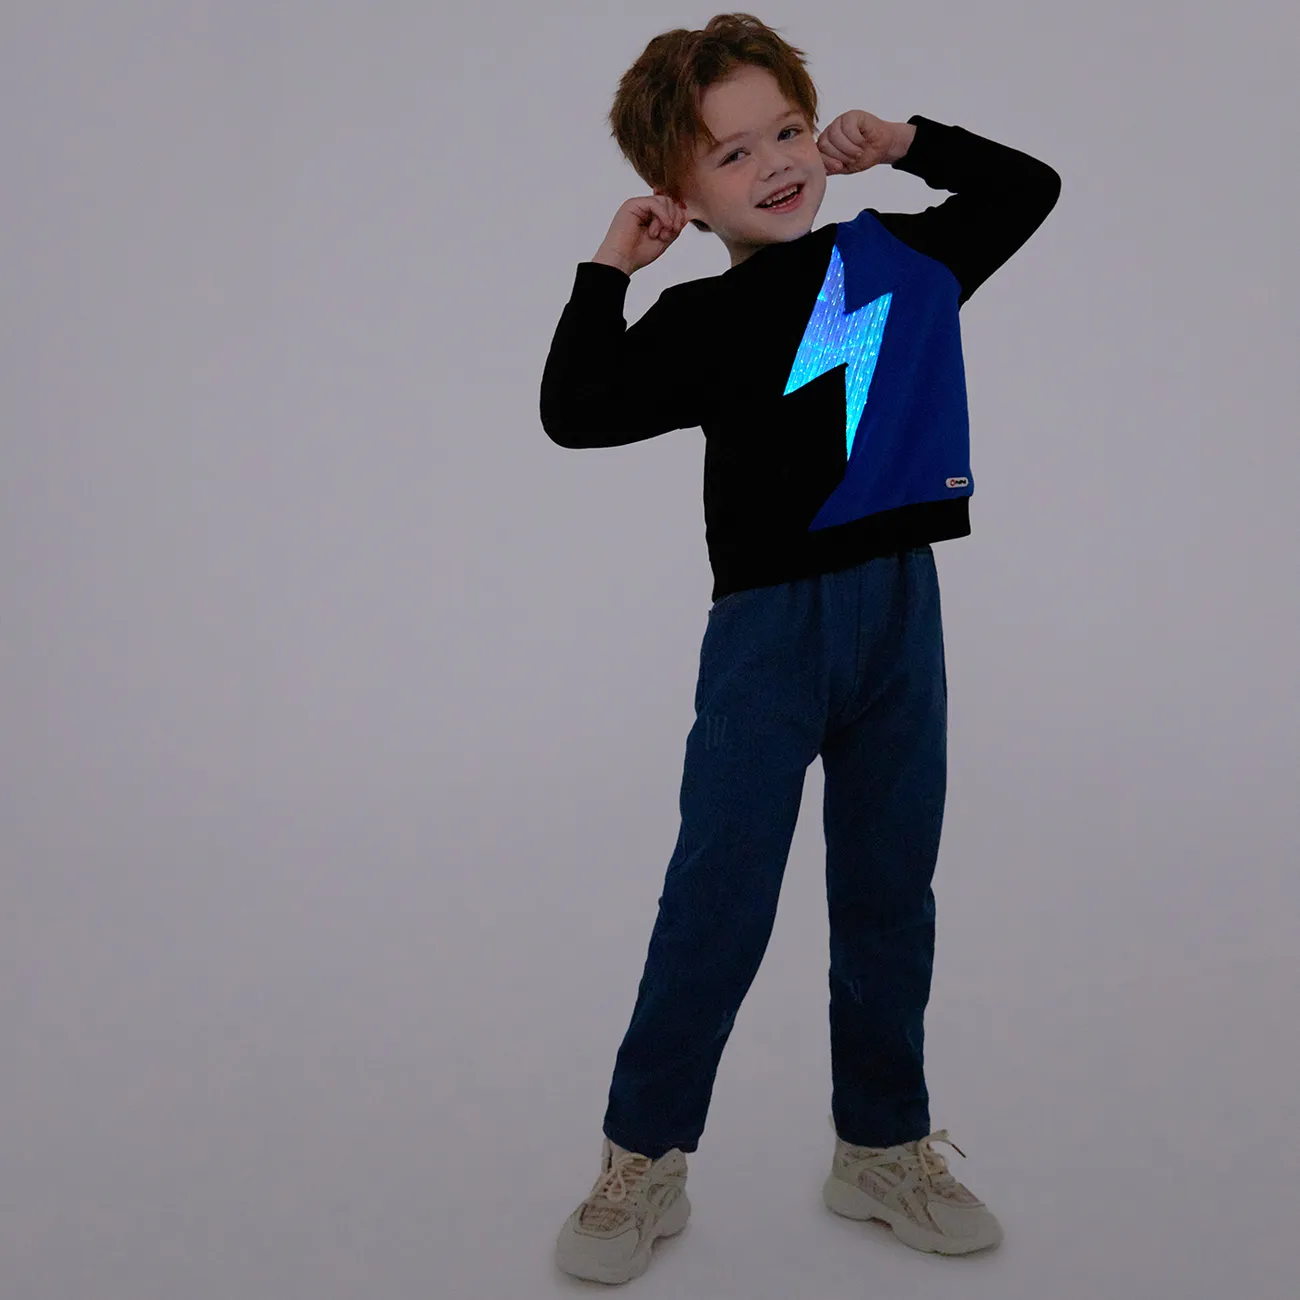 Go-Glow Illuminating Sweatshirt with Light Up Color Blocking Lightning Pattern Including Controller (Built-In Battery) ColorBlock big image 1